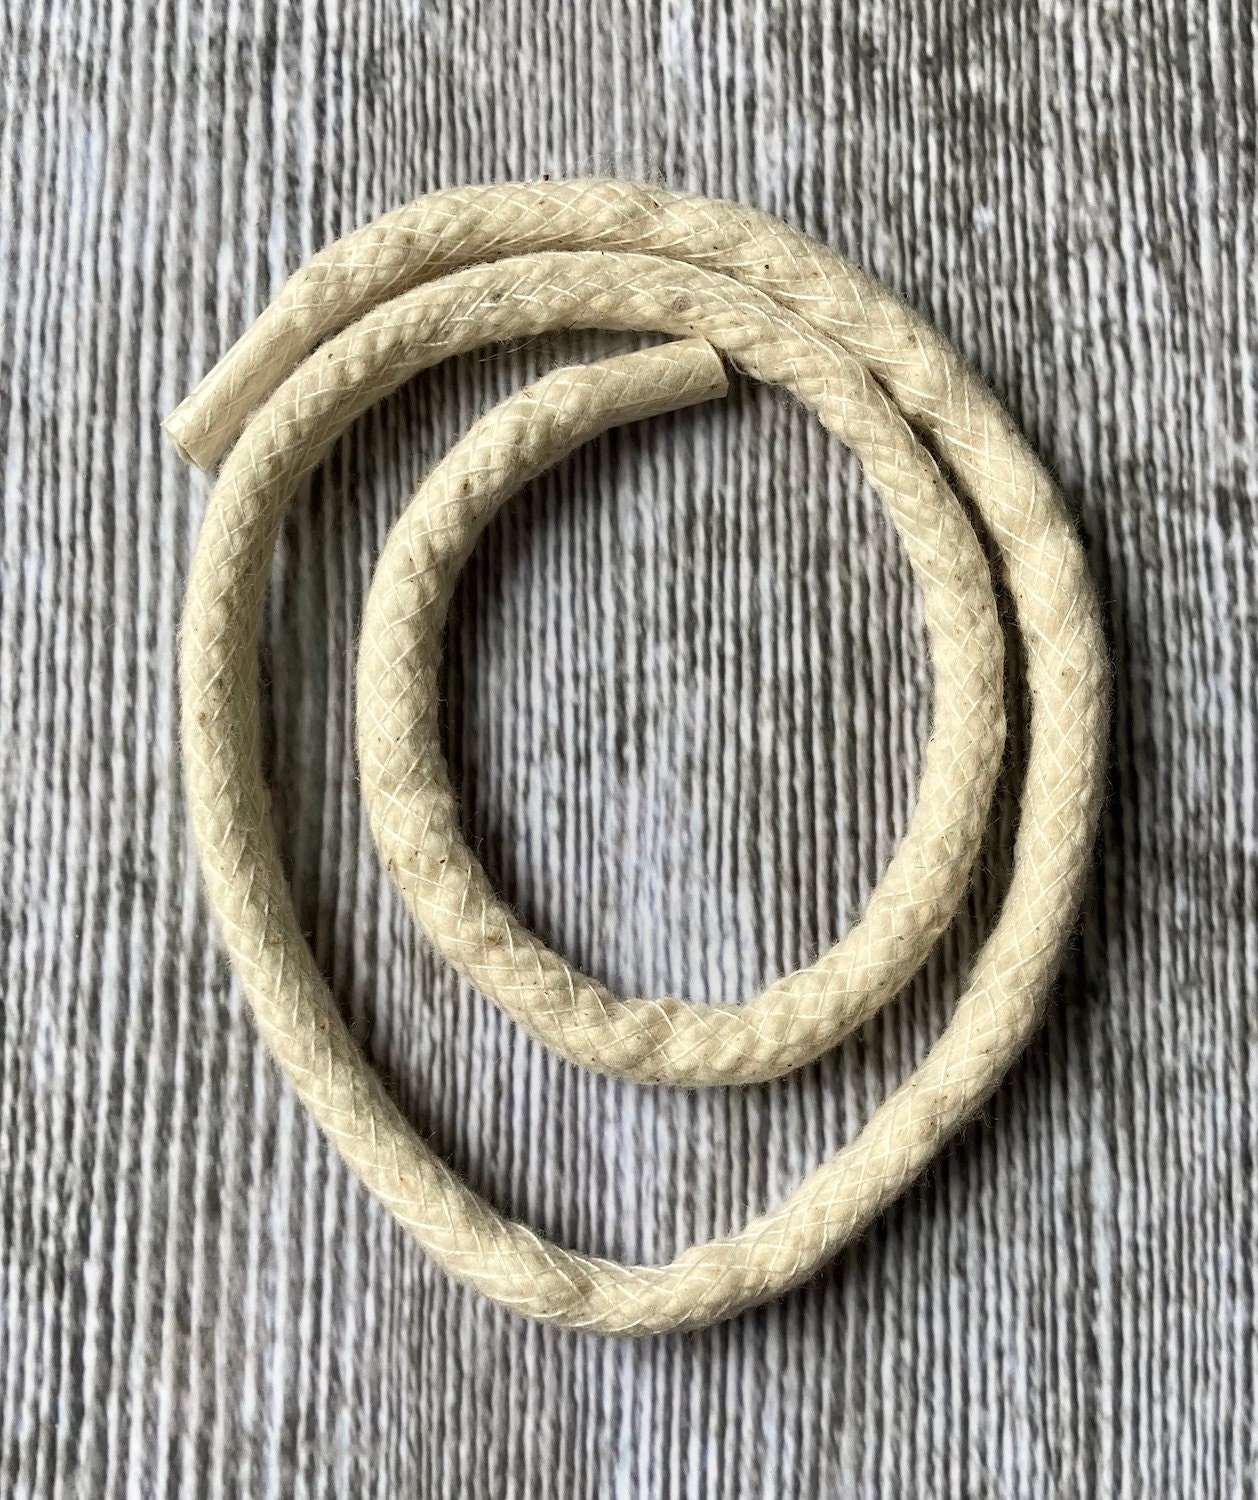 Cotton Bolo cord for bracelets and necklaces